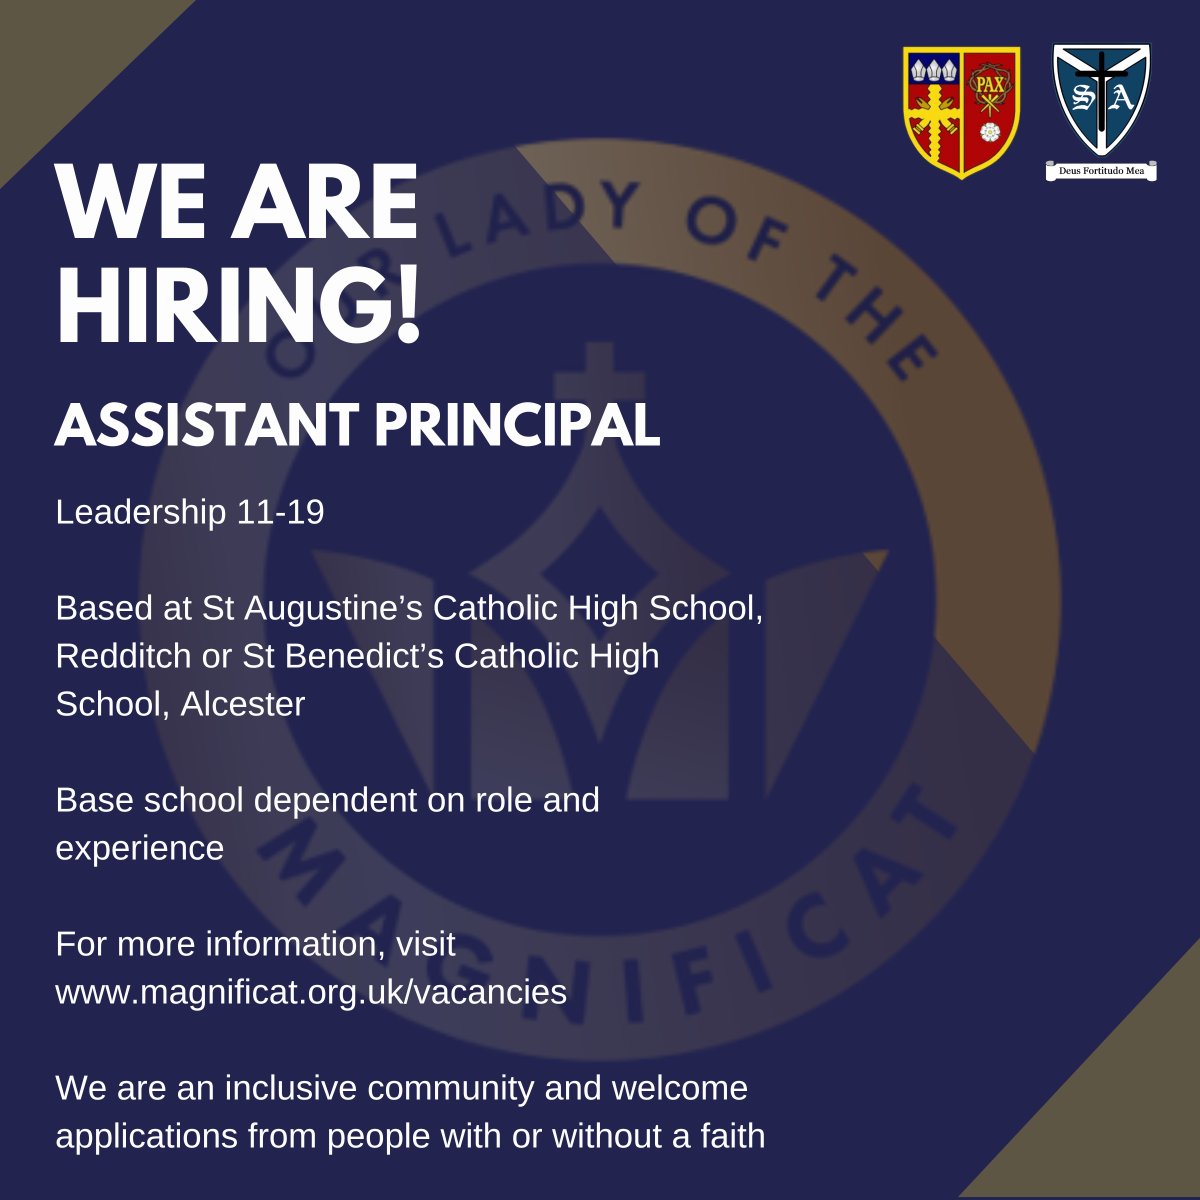 Ready to take the next step in your career? We're seeking passionate individuals to join two of our schools as Assistant Principals! 💼 #CareerOpportunity #EducationJobs #SchoolLeadership #CareerInEducation #LeadershipOpportunity #JobSearch #LeadershipRole